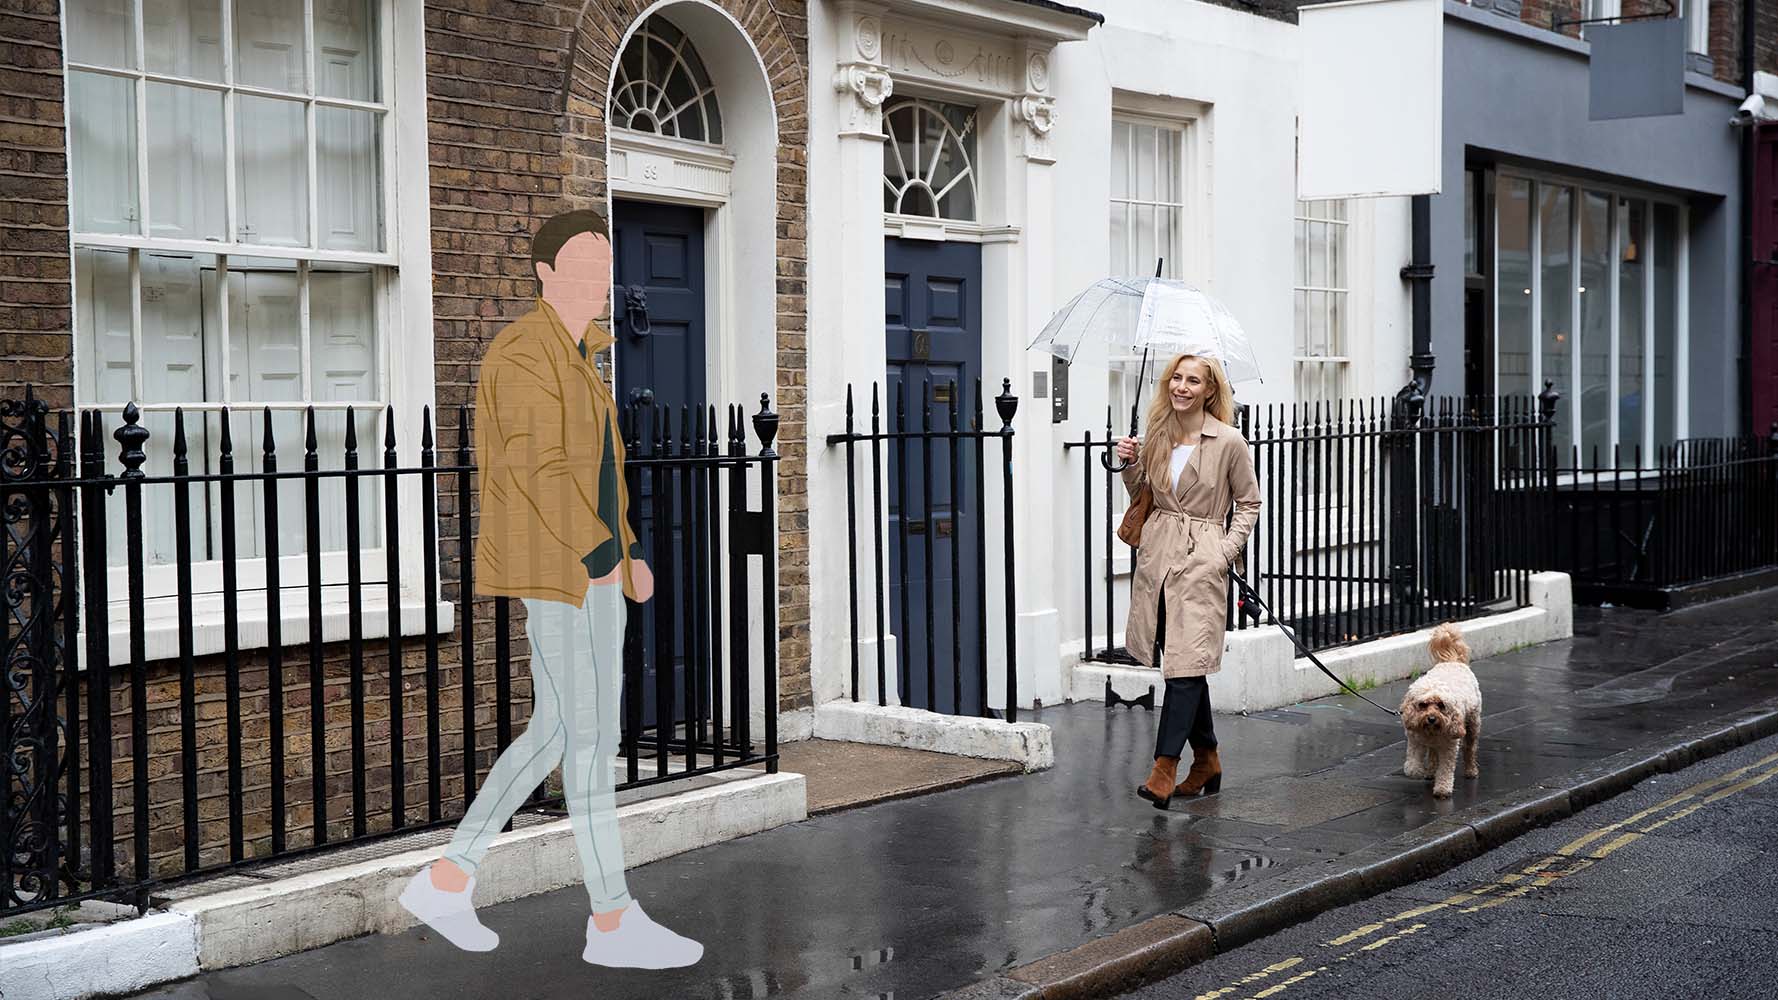 Image of a city street, with cartoonish people on the pavement to illustrate what a person with CBS might experience